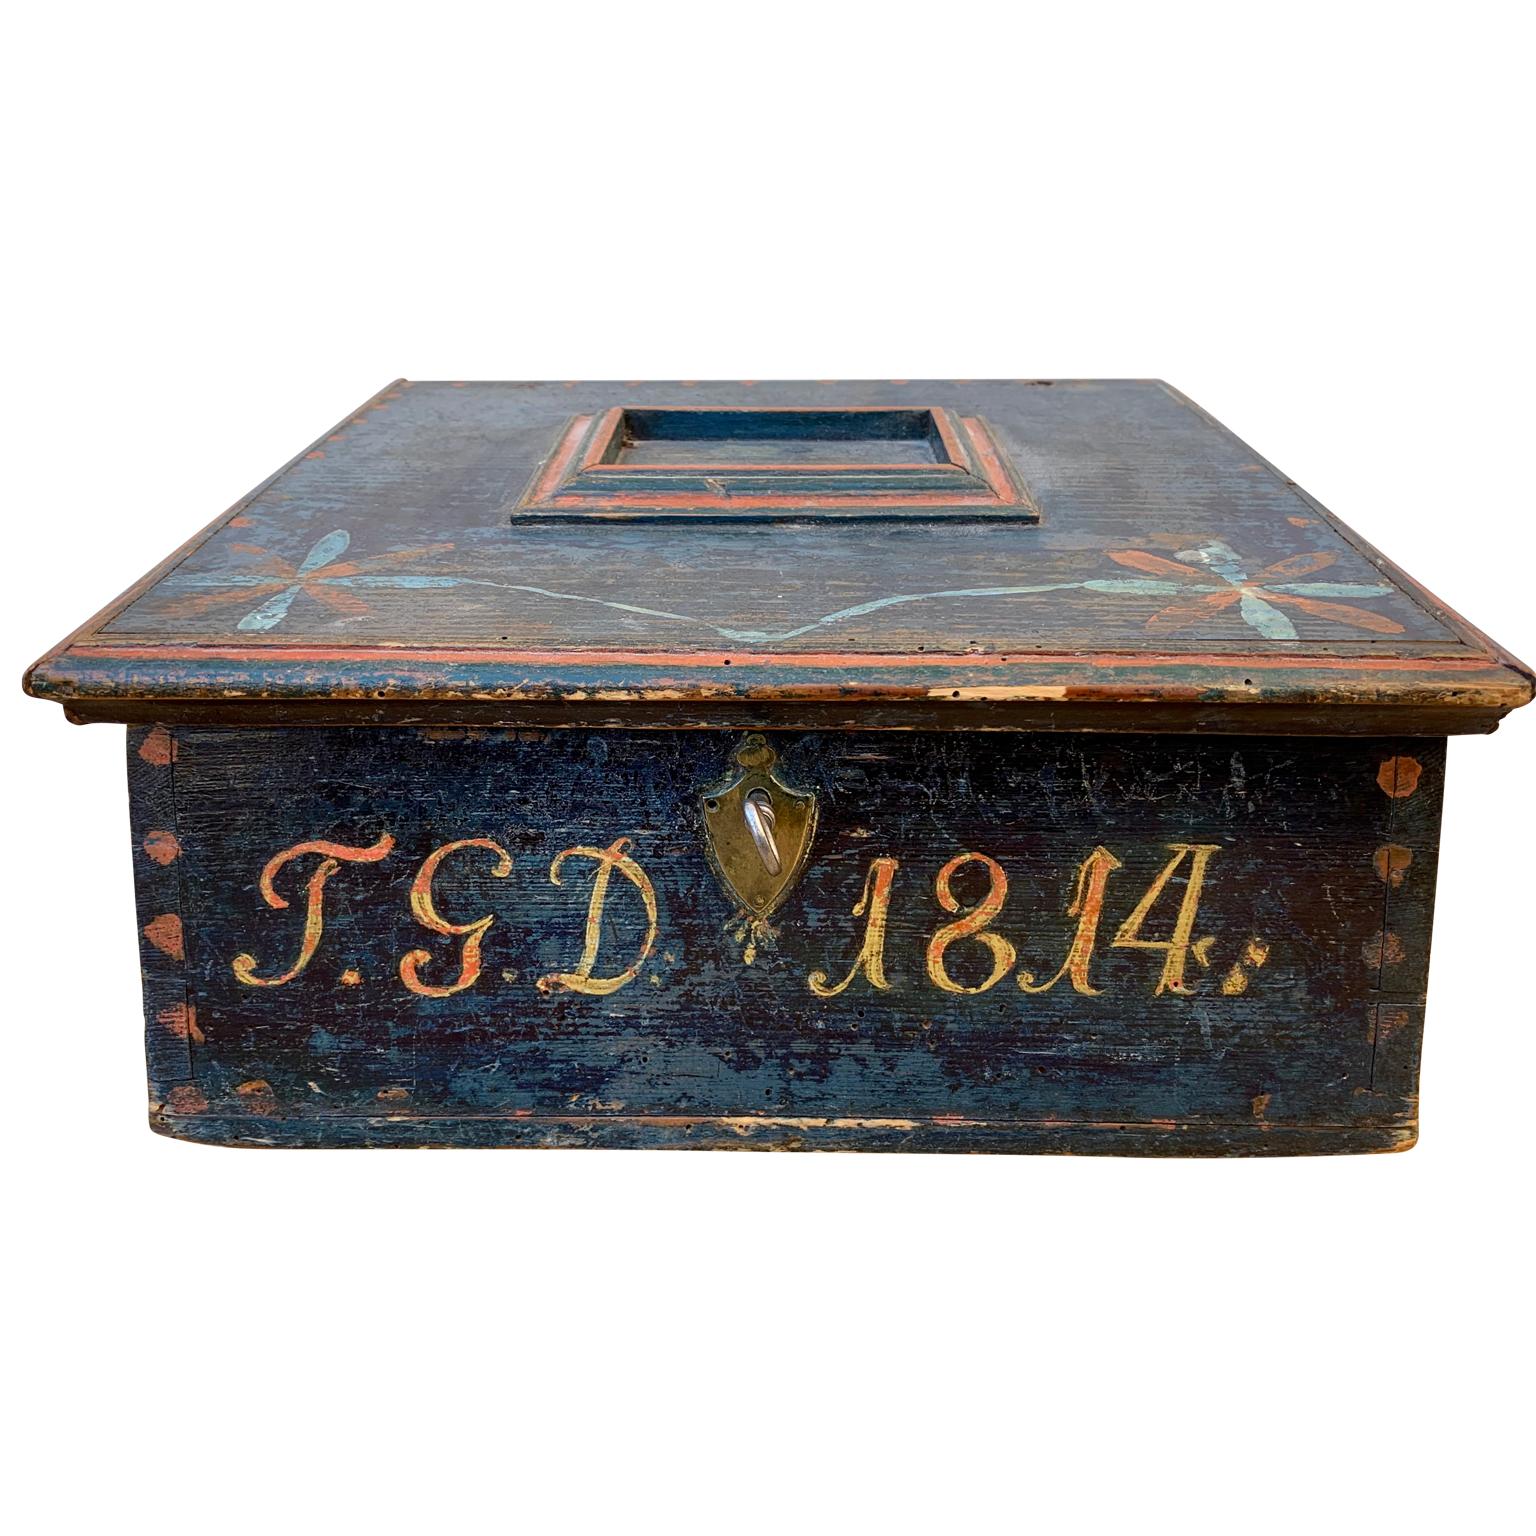 A 19th Century Swedish original blue painted Folk Art box with original polychrome decoration. Dated 1814 with the initial of the female owner IGD, most likely used to keep writing supplies and office materials.
With original lock and key, it was